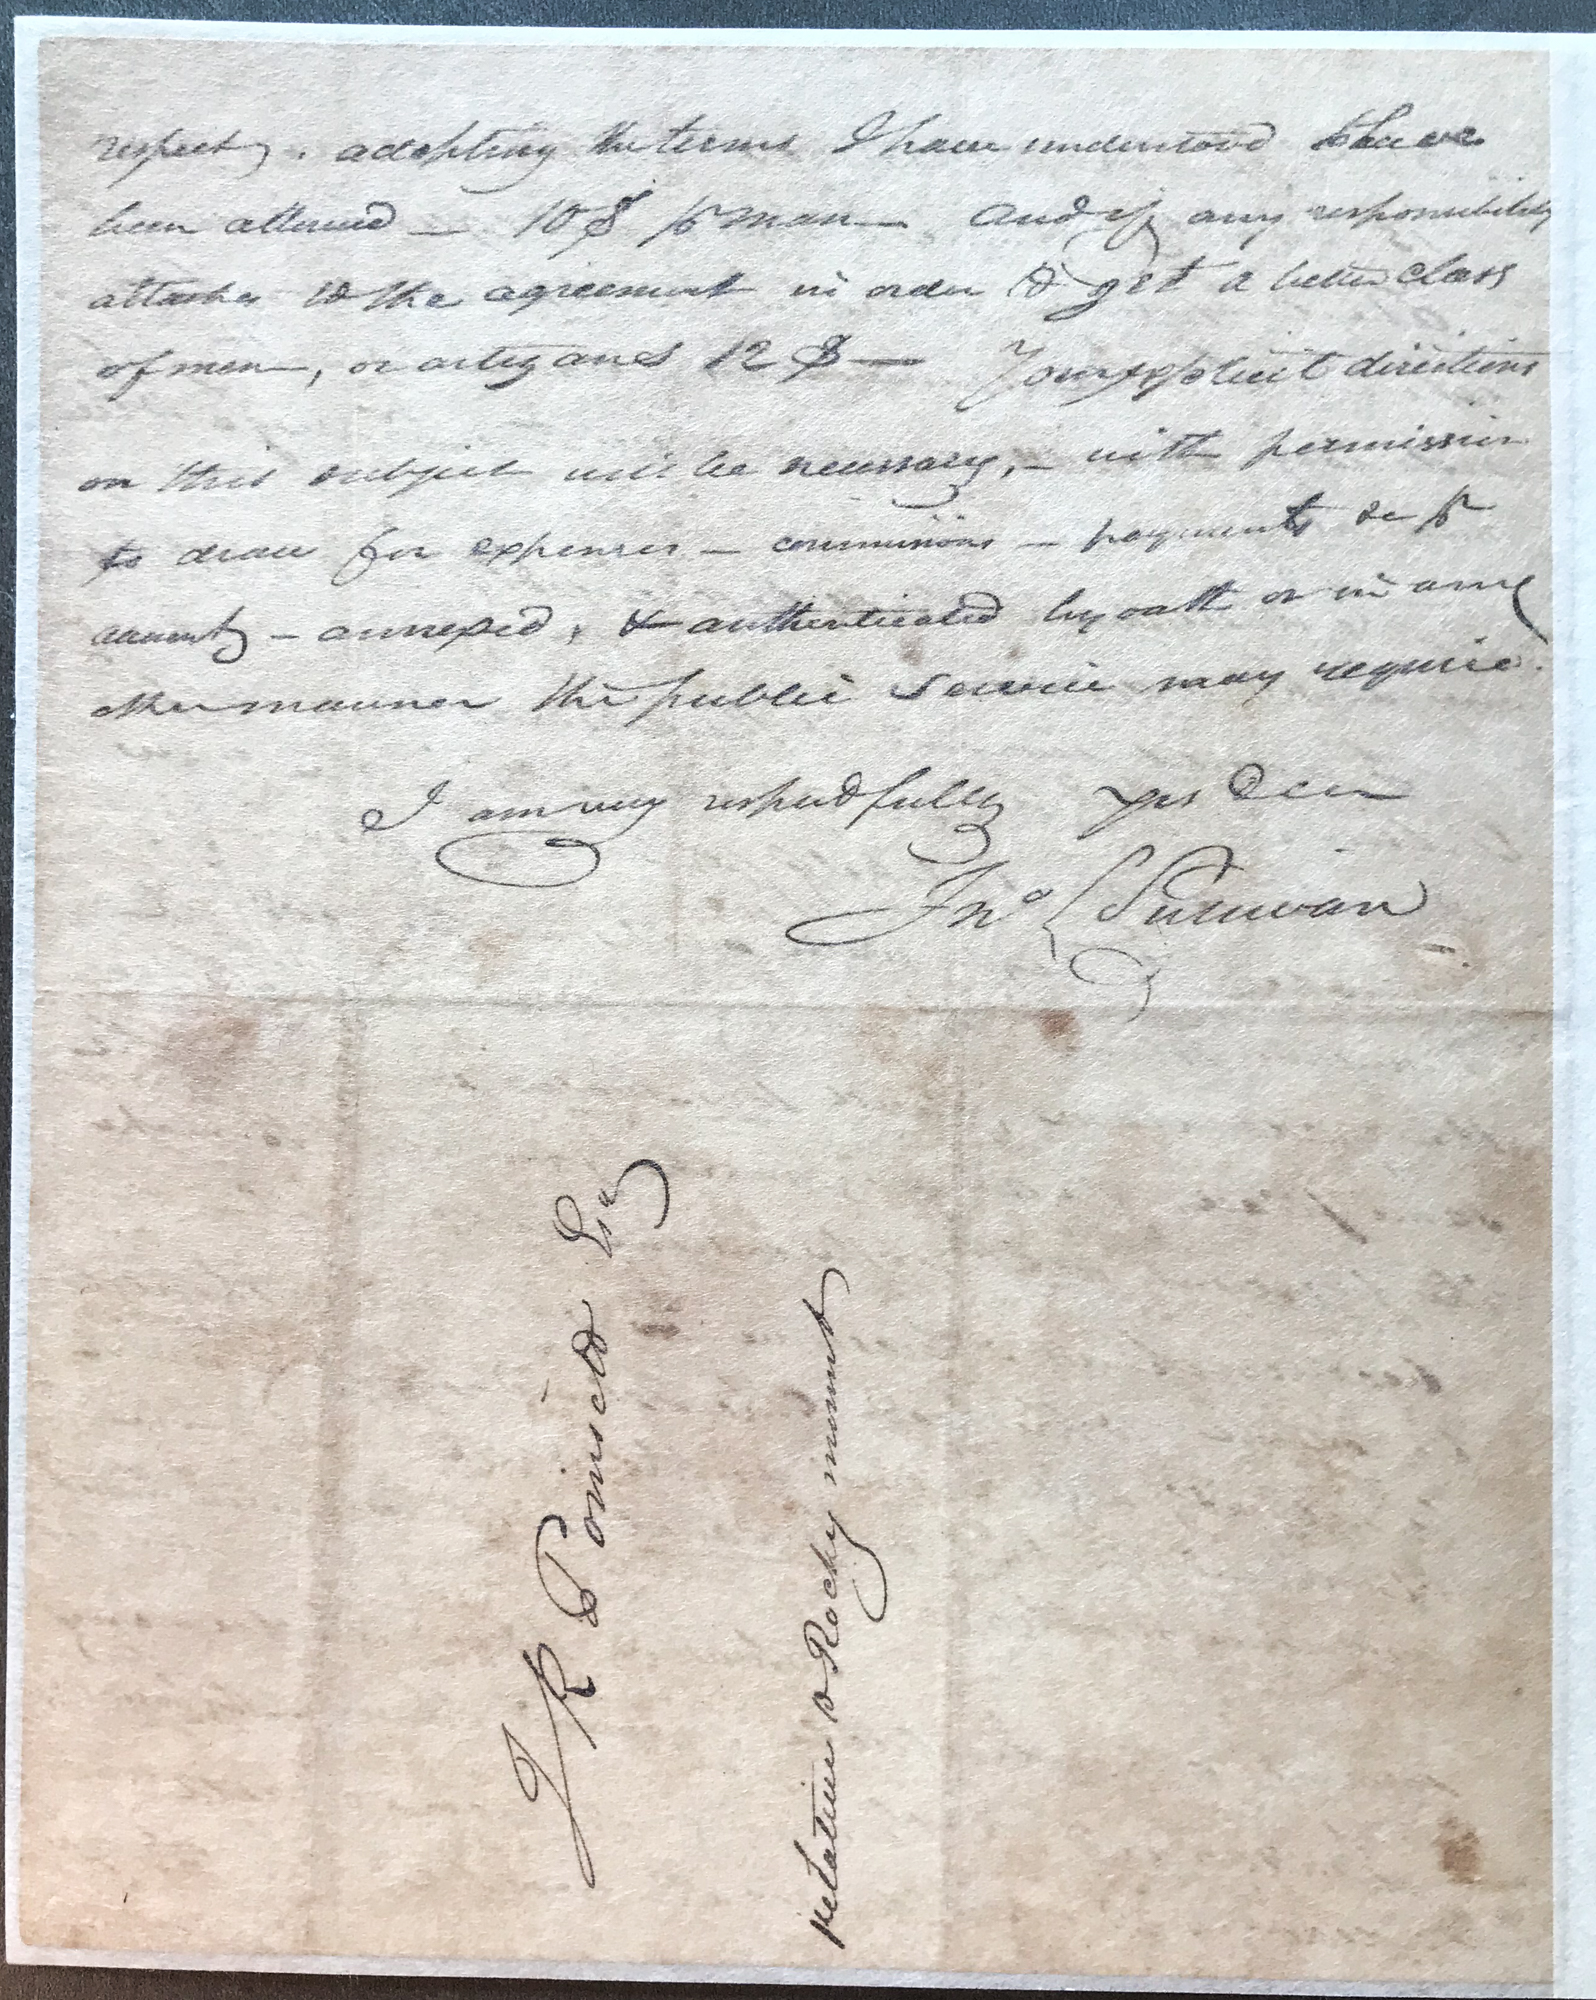 CONTRACT FOR CONSTRUCTION - 1820, p. 4